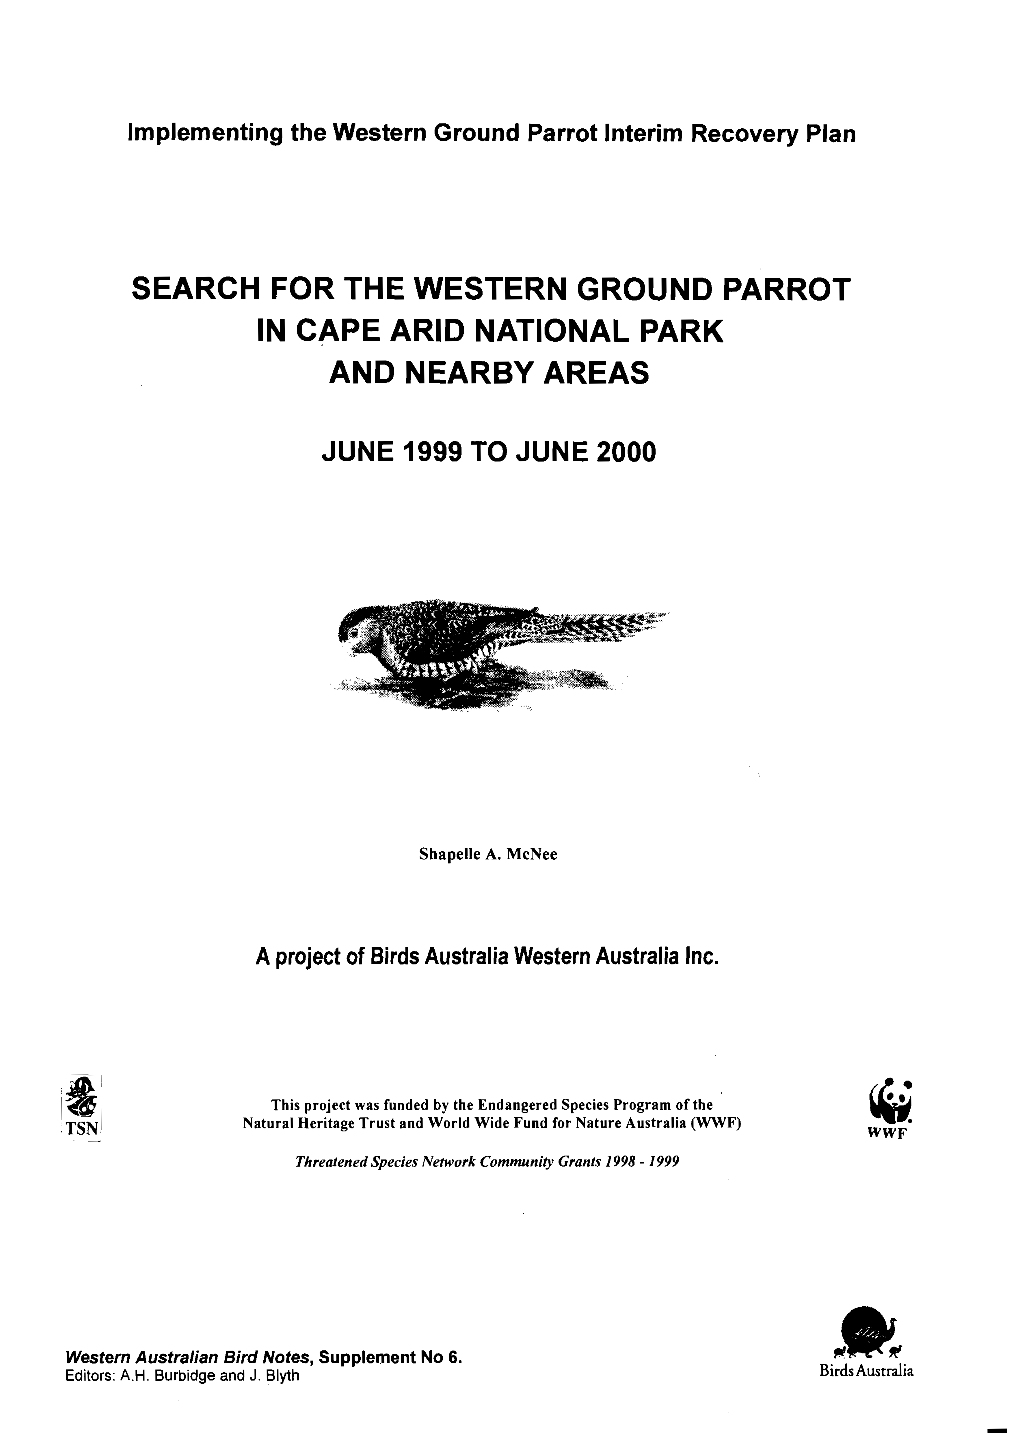 Search for the Western Ground Parrot in Cape Arid National Park and Nearby Areas